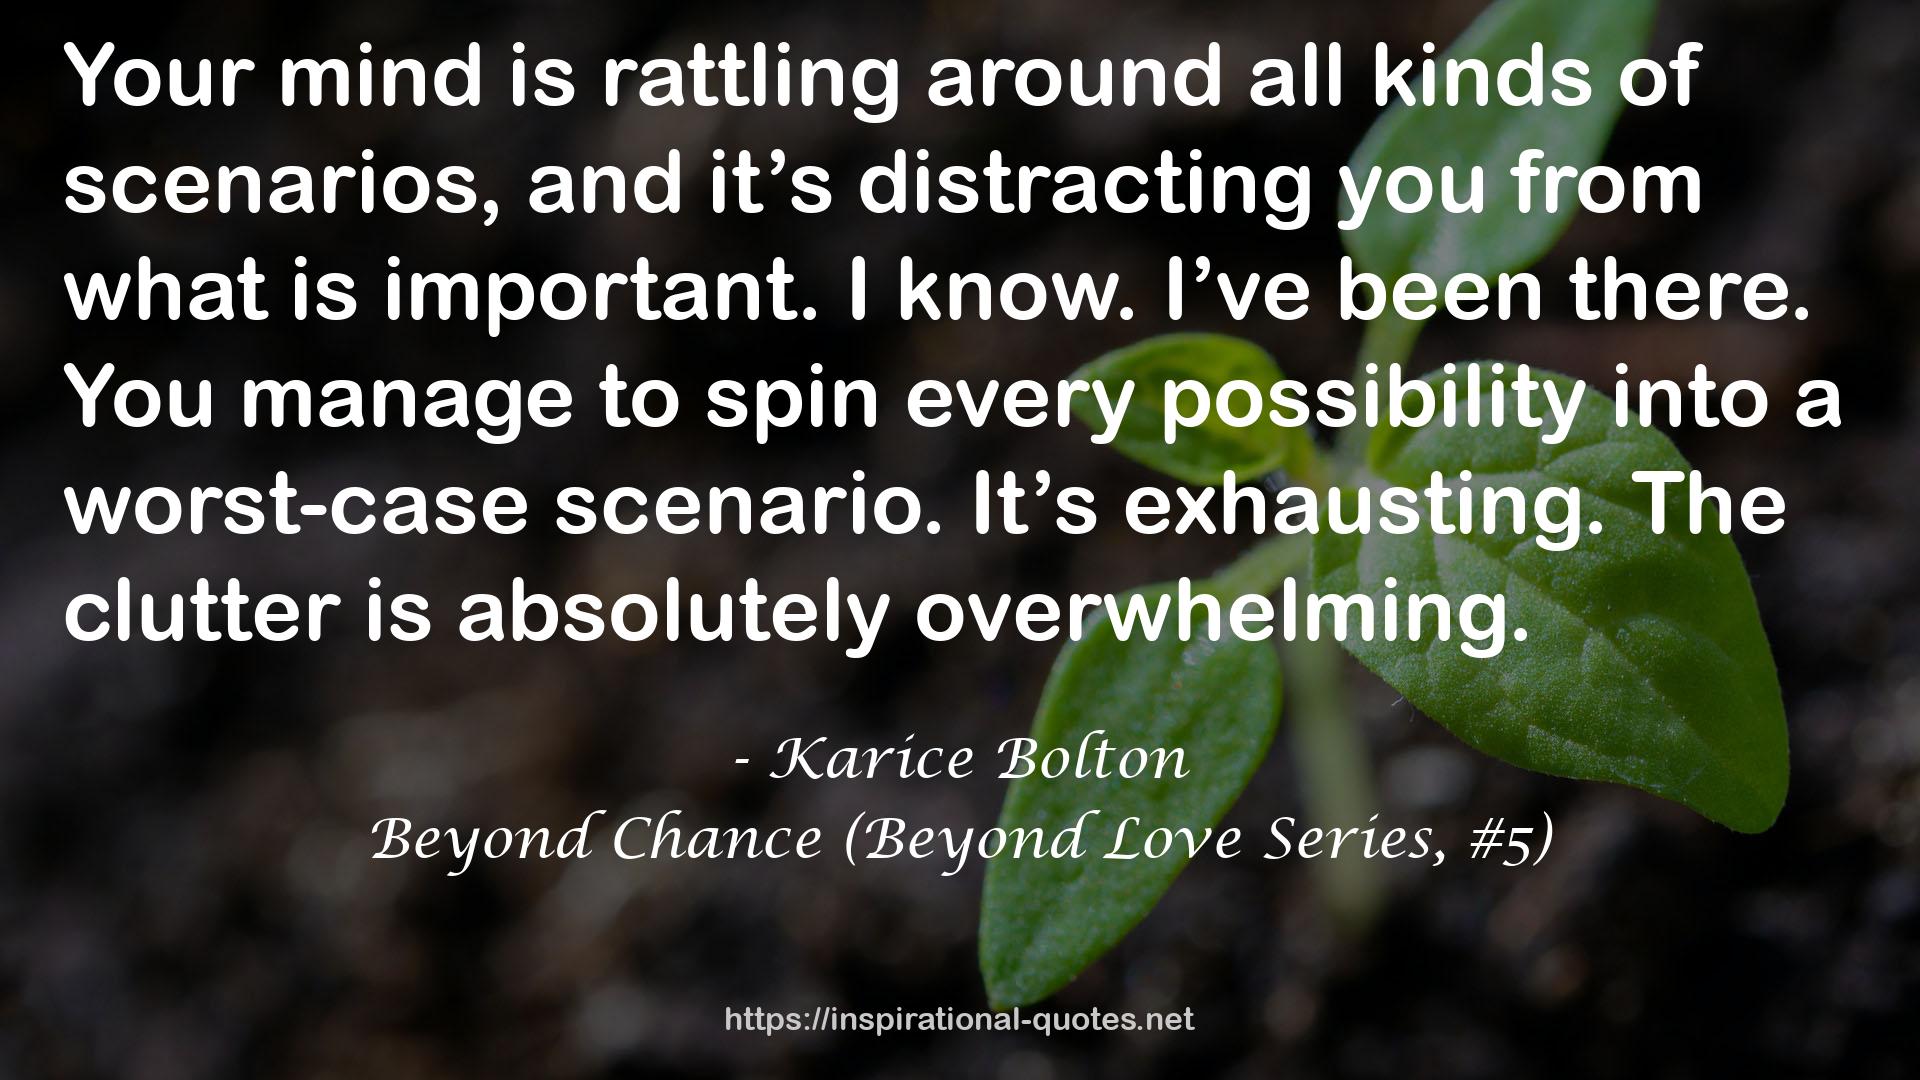 Beyond Chance (Beyond Love Series, #5) QUOTES